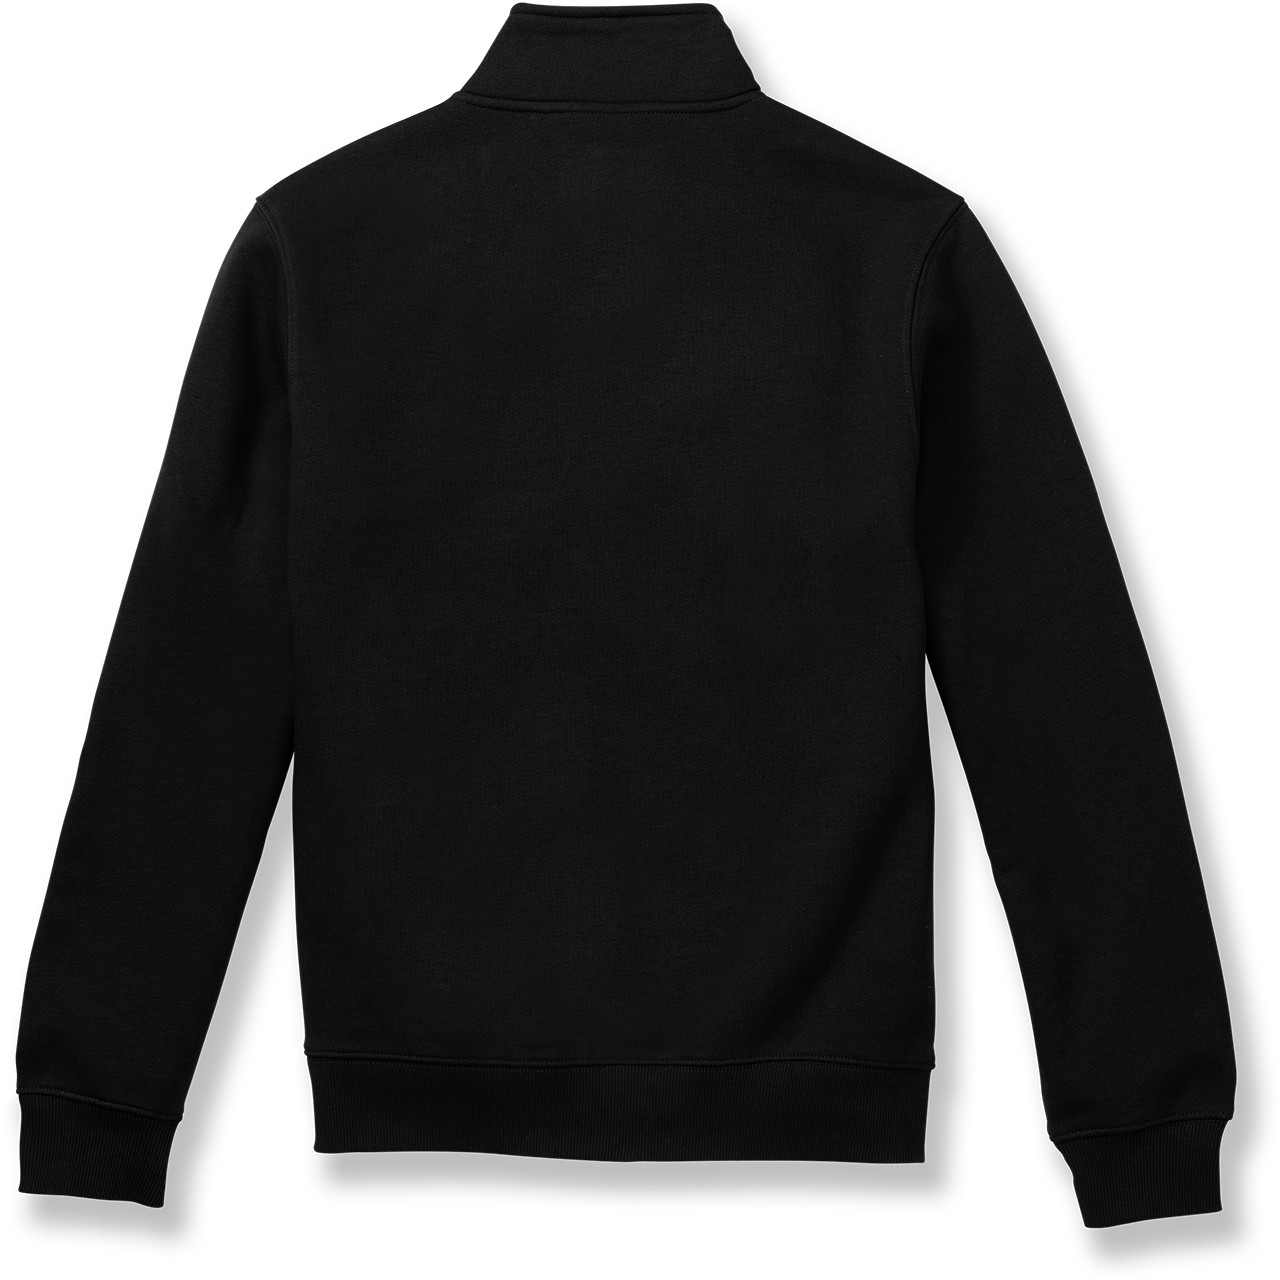 1/4 Zip Sweatshirt with embroidered logo [PA511-ST253/AW-BLACK] -  FlynnO'Hara Uniforms